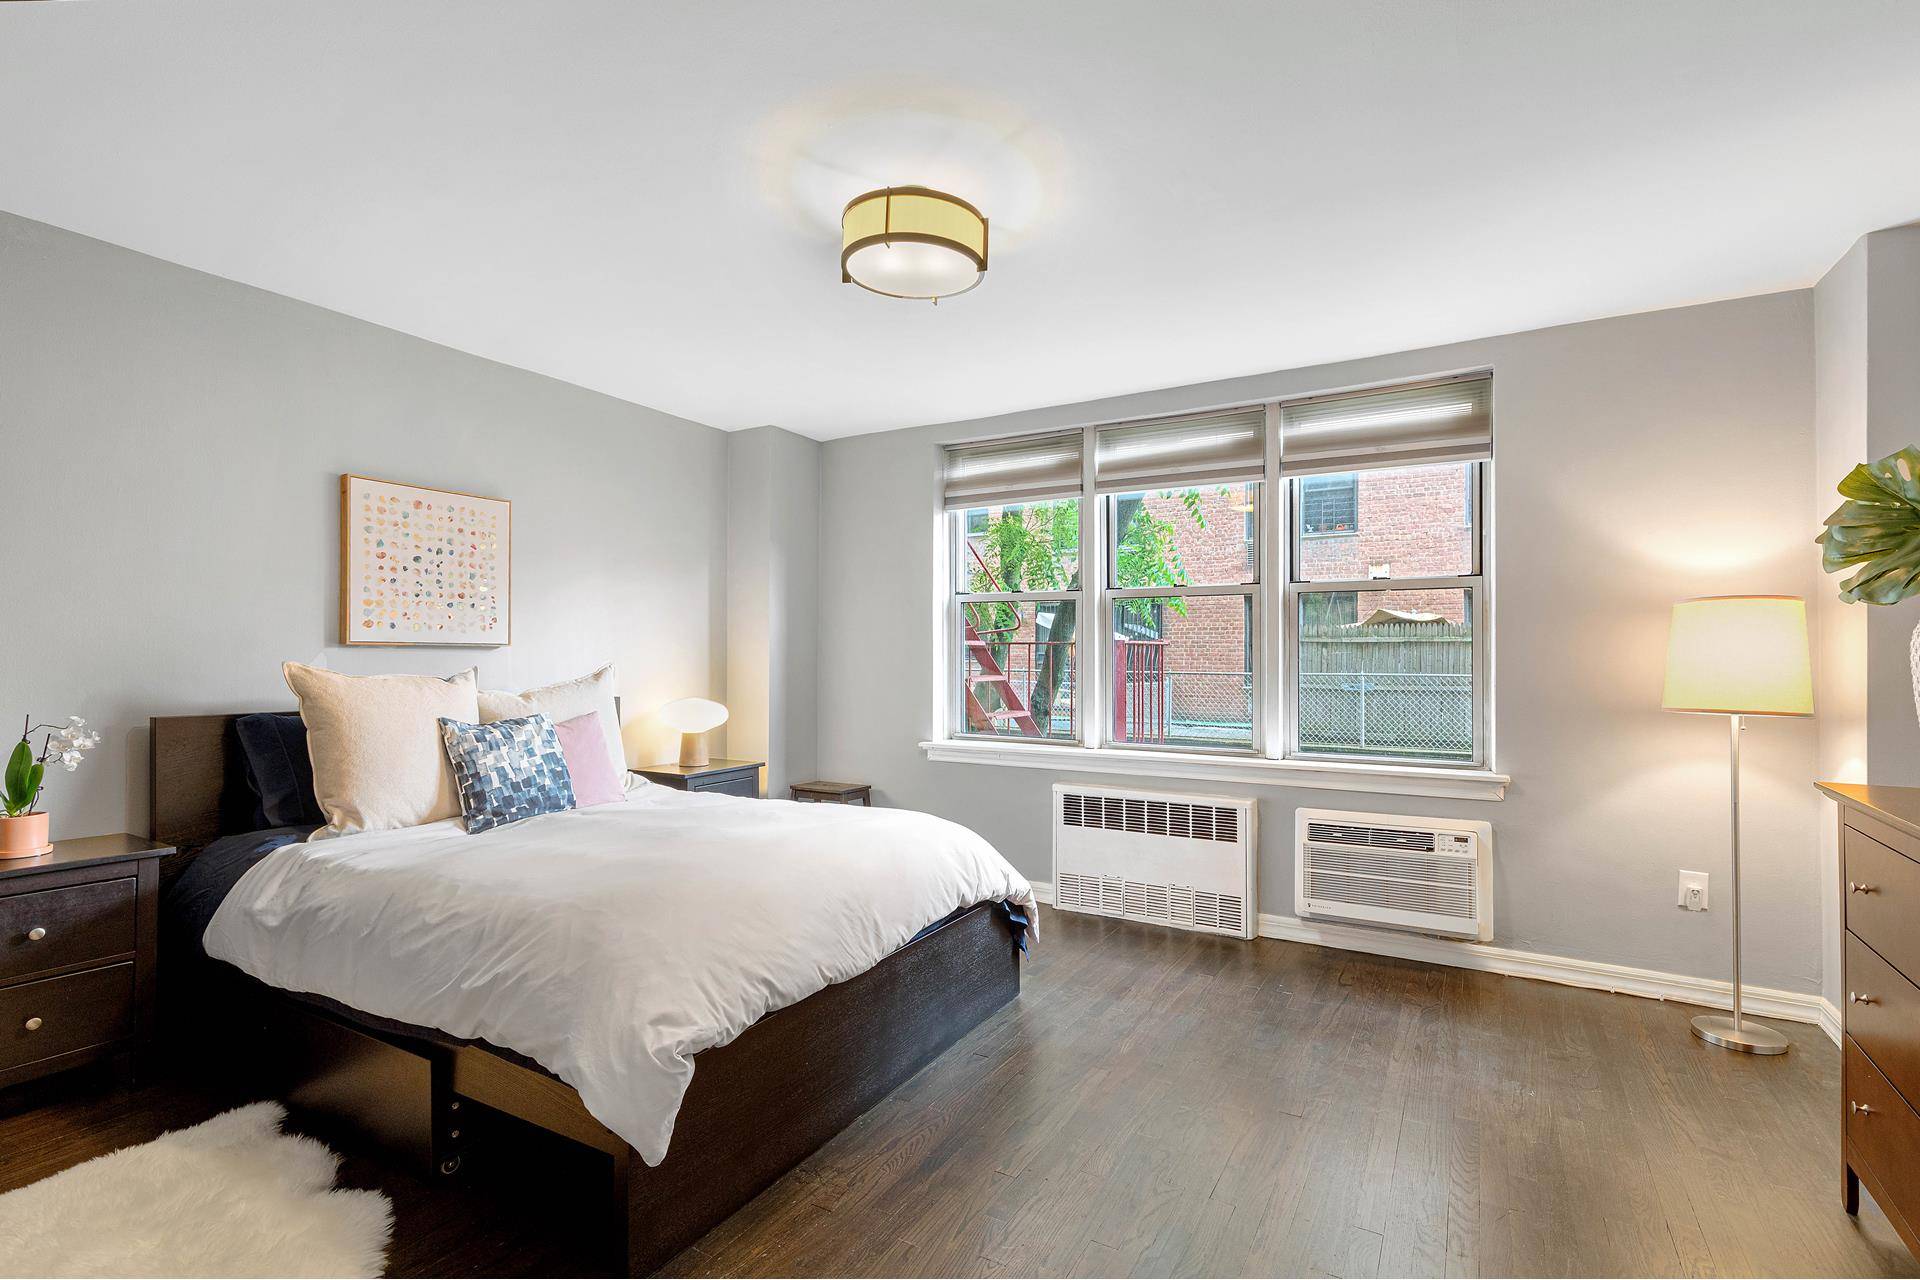 MOVE RIGHT IN ! This impeccably updated and maintained one bedroom apartment is ideally located half a block from Cortelyou Road.